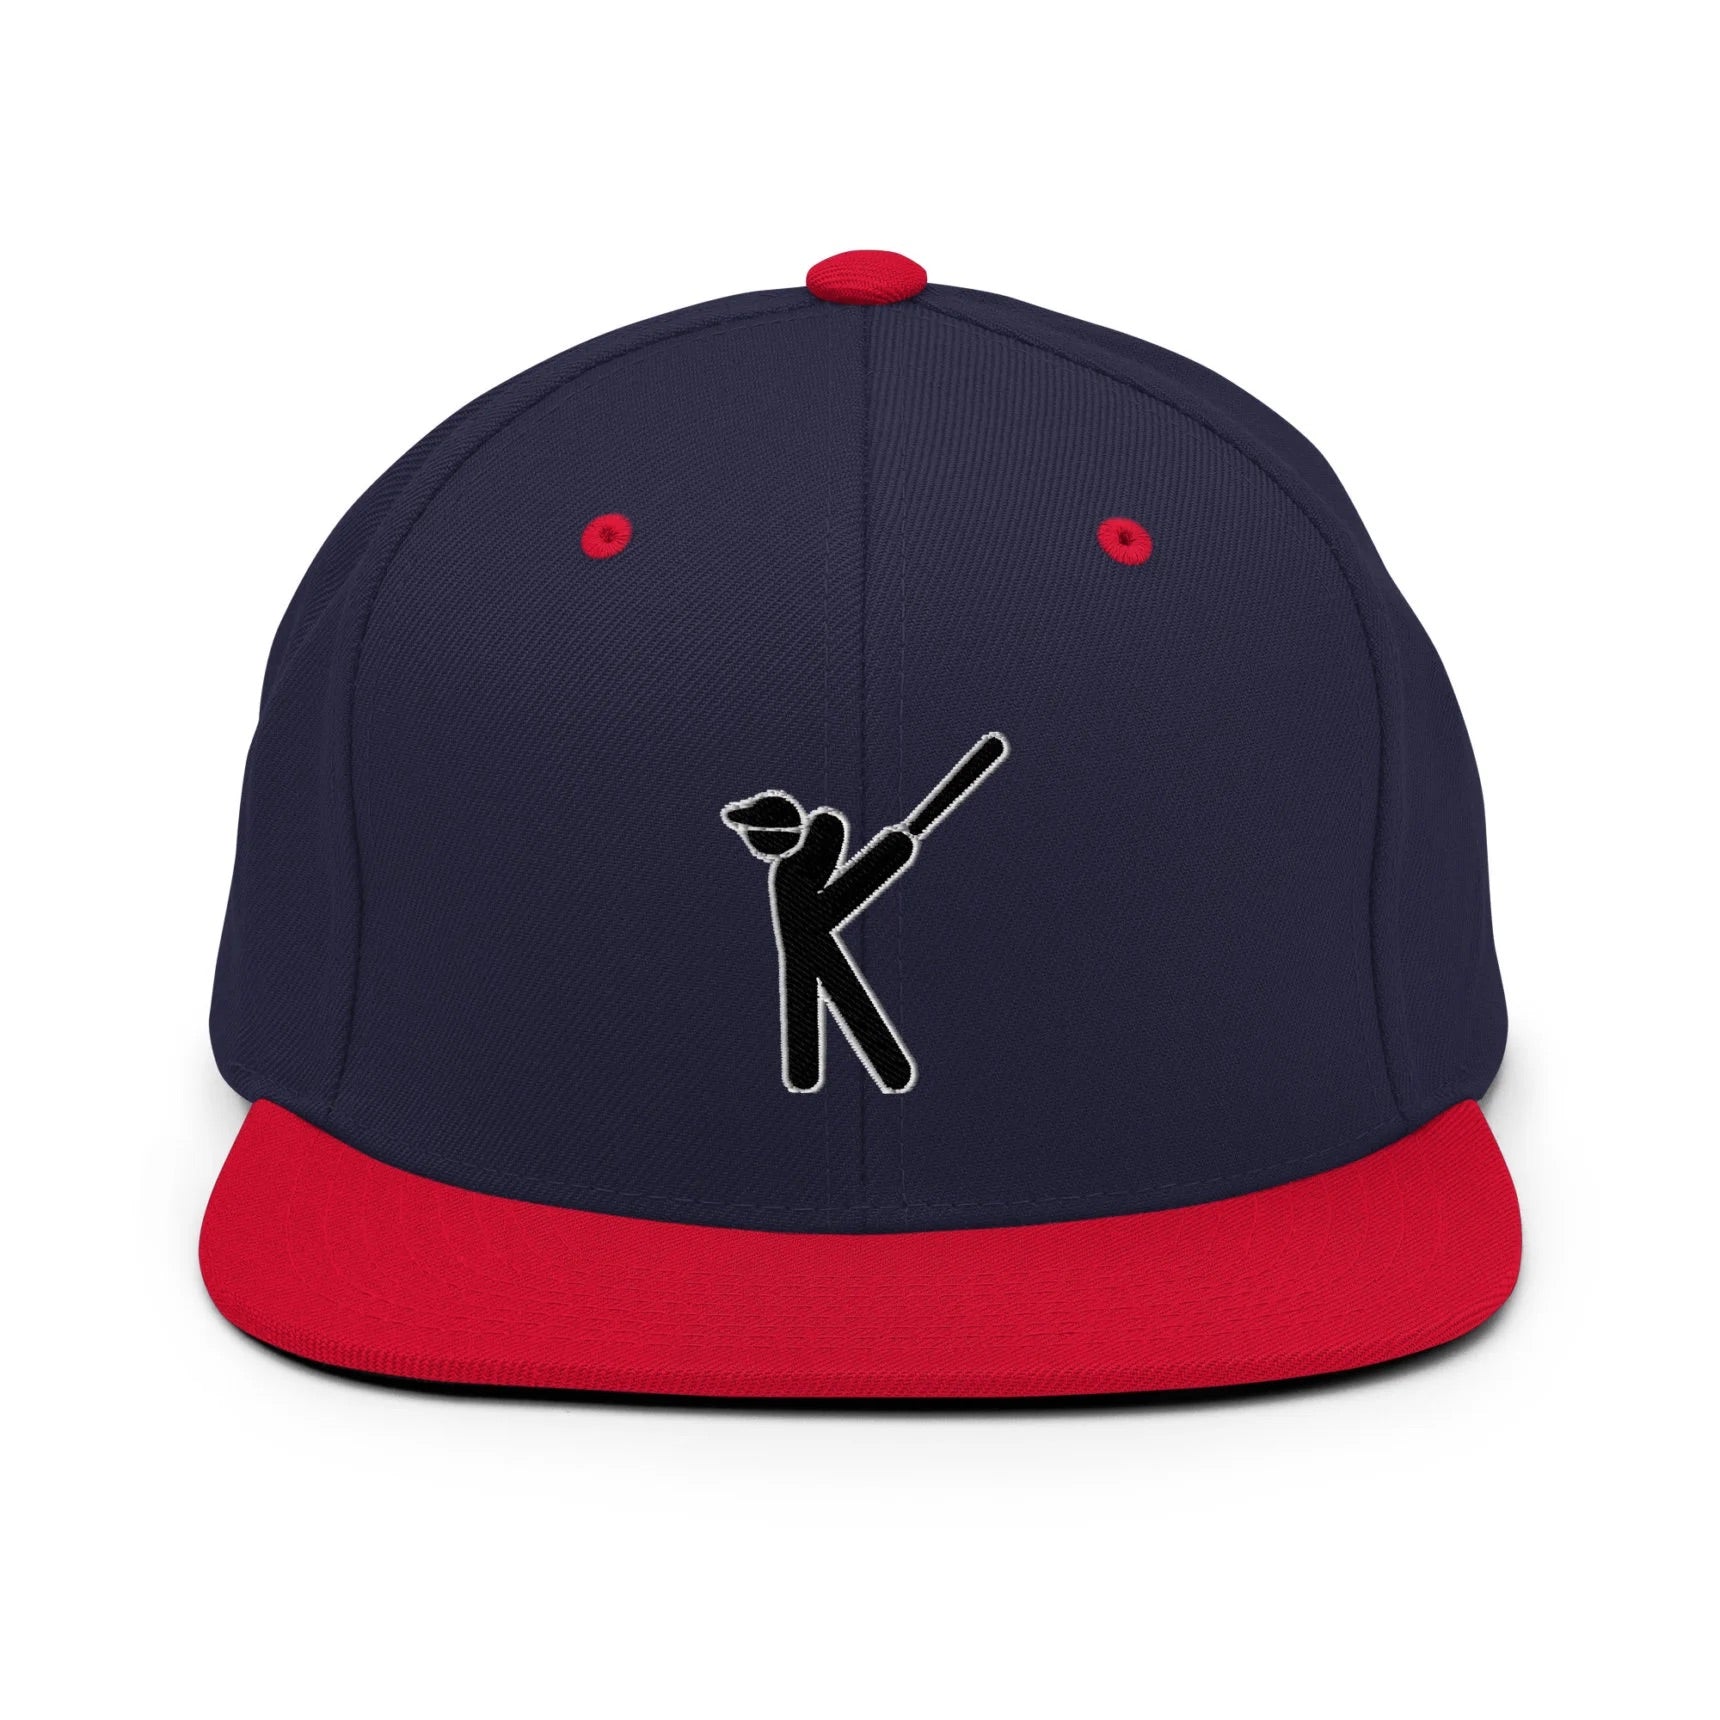 Kasabe ShowZone snapback hat in navy with red brim and accents